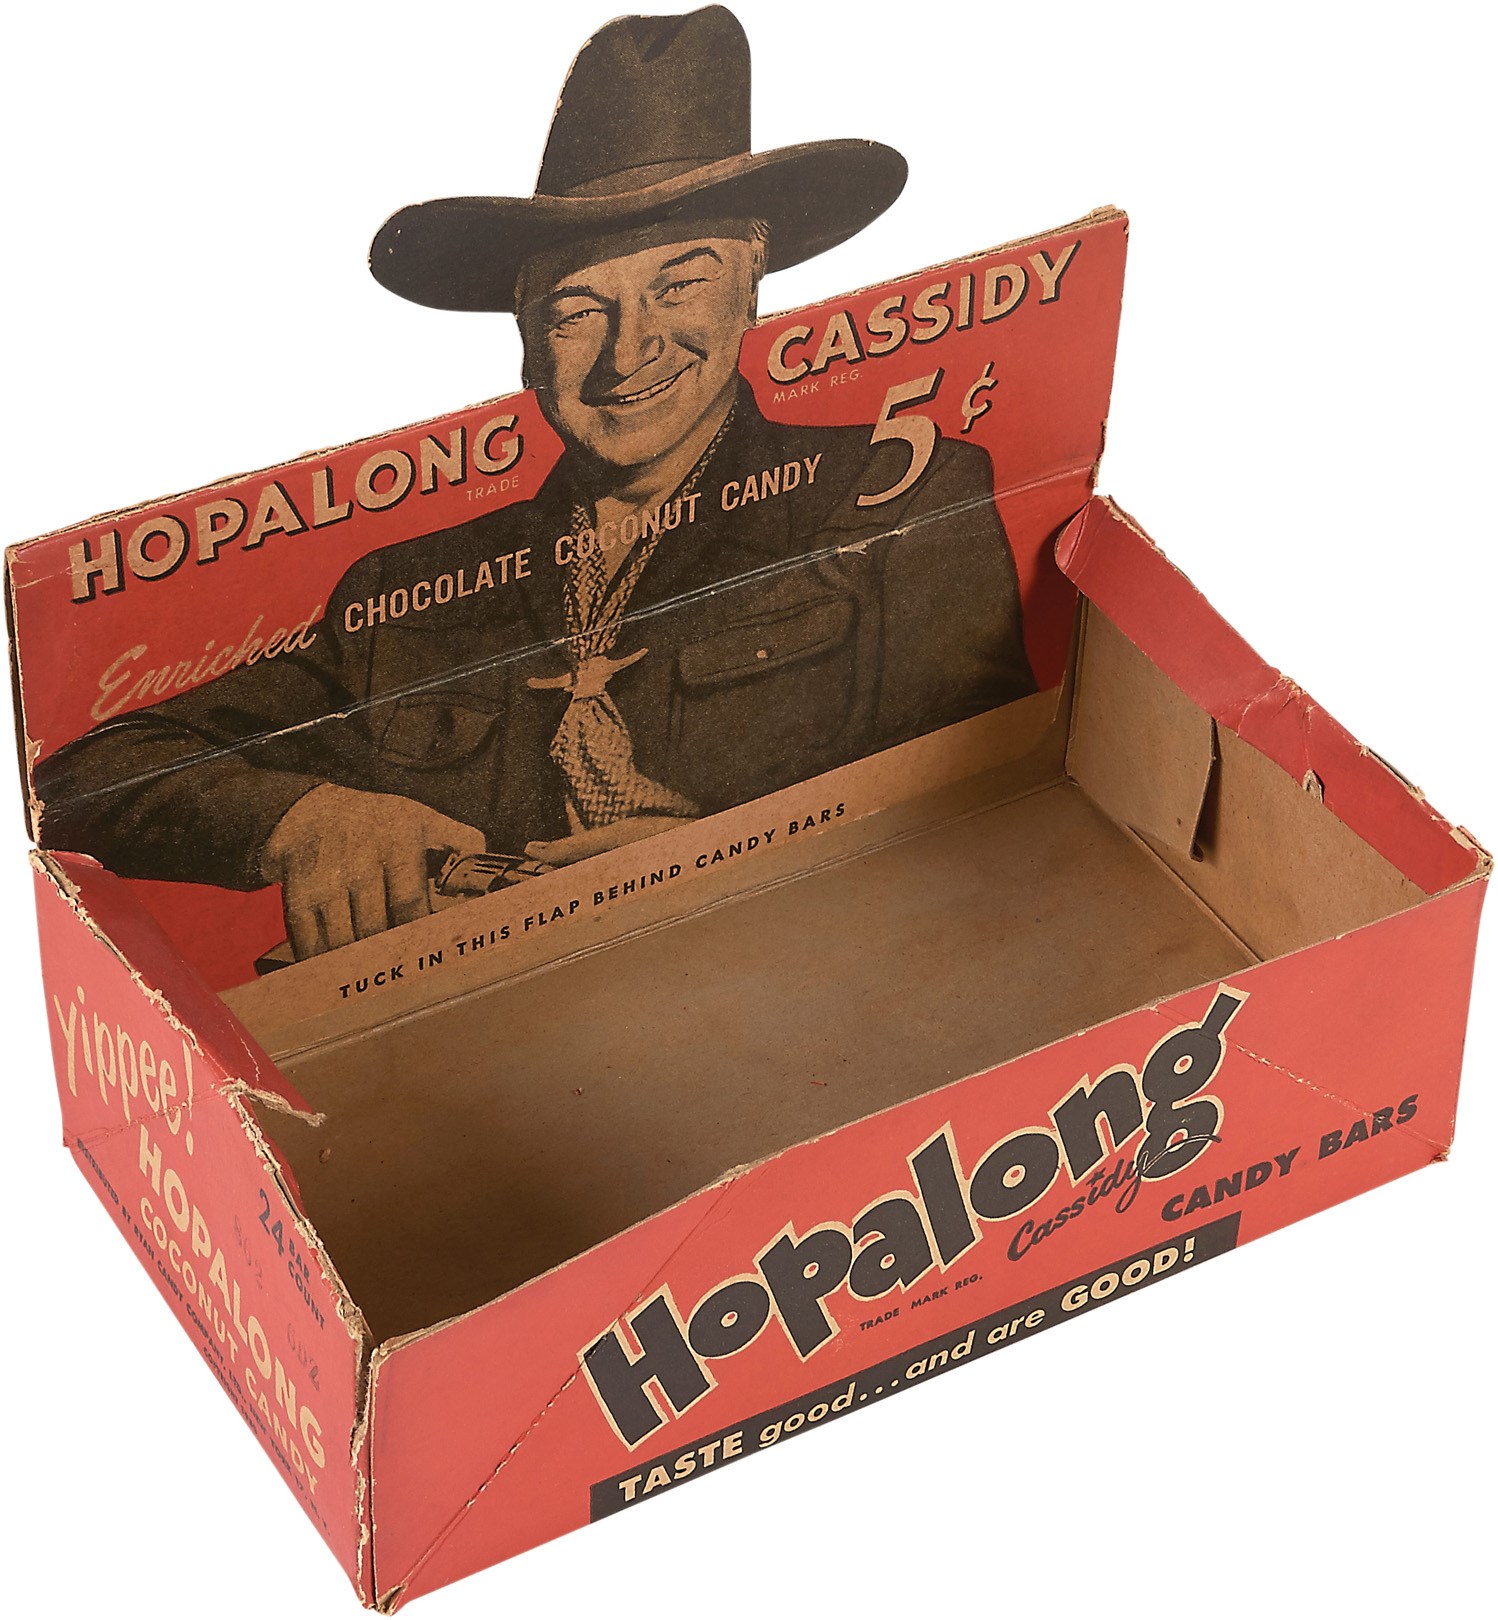 1950 Hopalong Cassidy Chocolate Candy Box with WIlliam Boyd